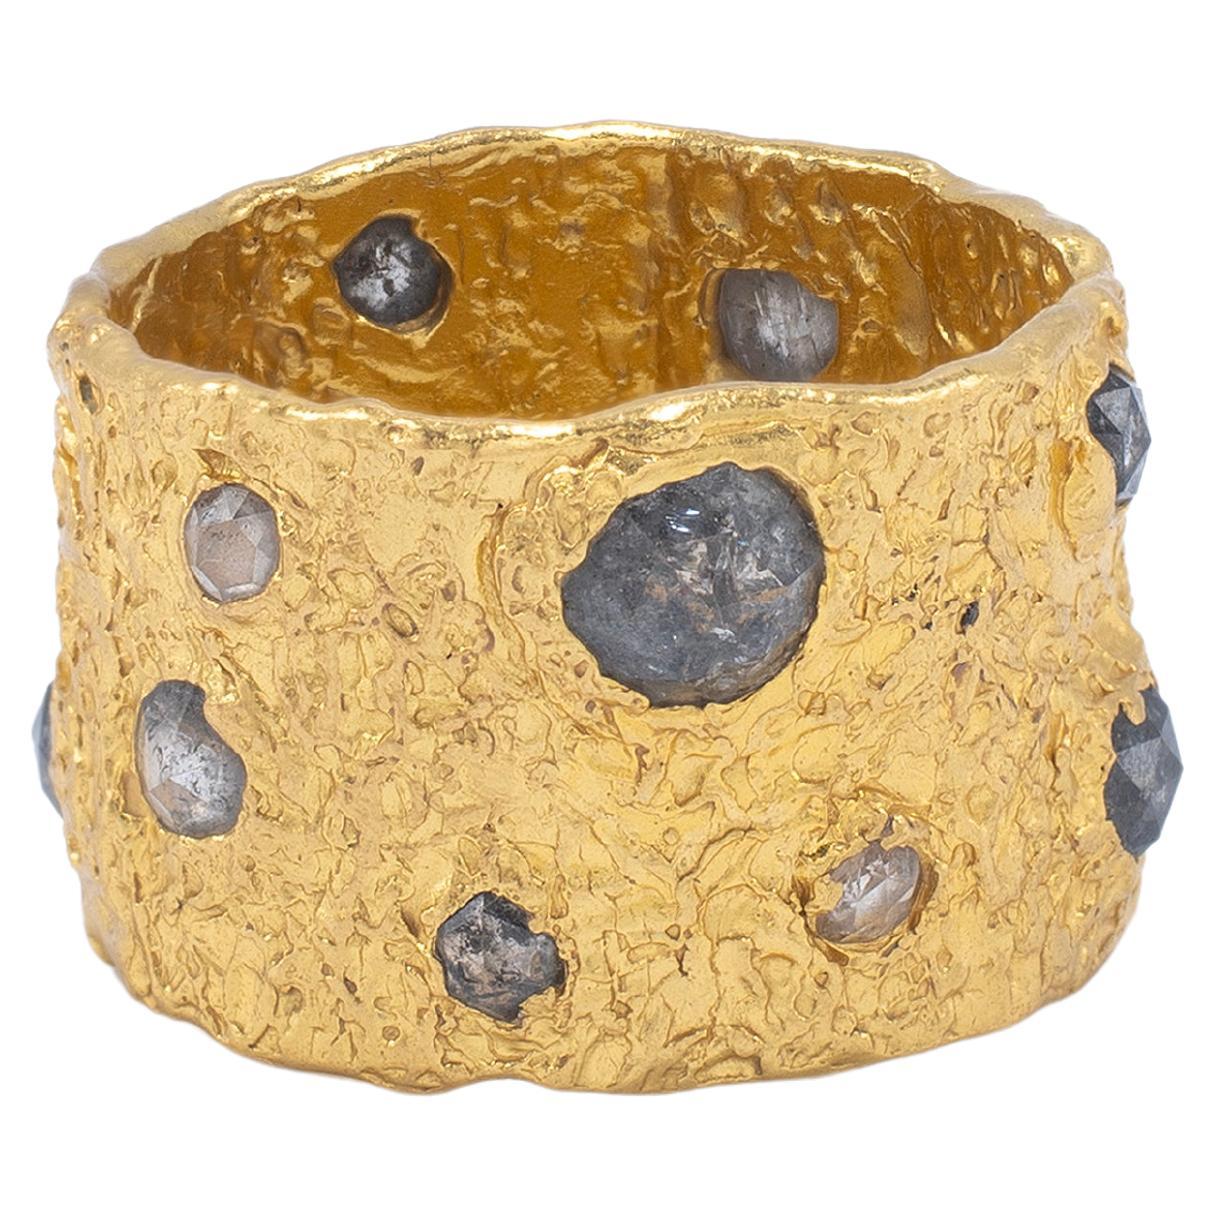 Artemis Salt and Pepper Diamond Ring in 22k Gold, by Tagili For Sale